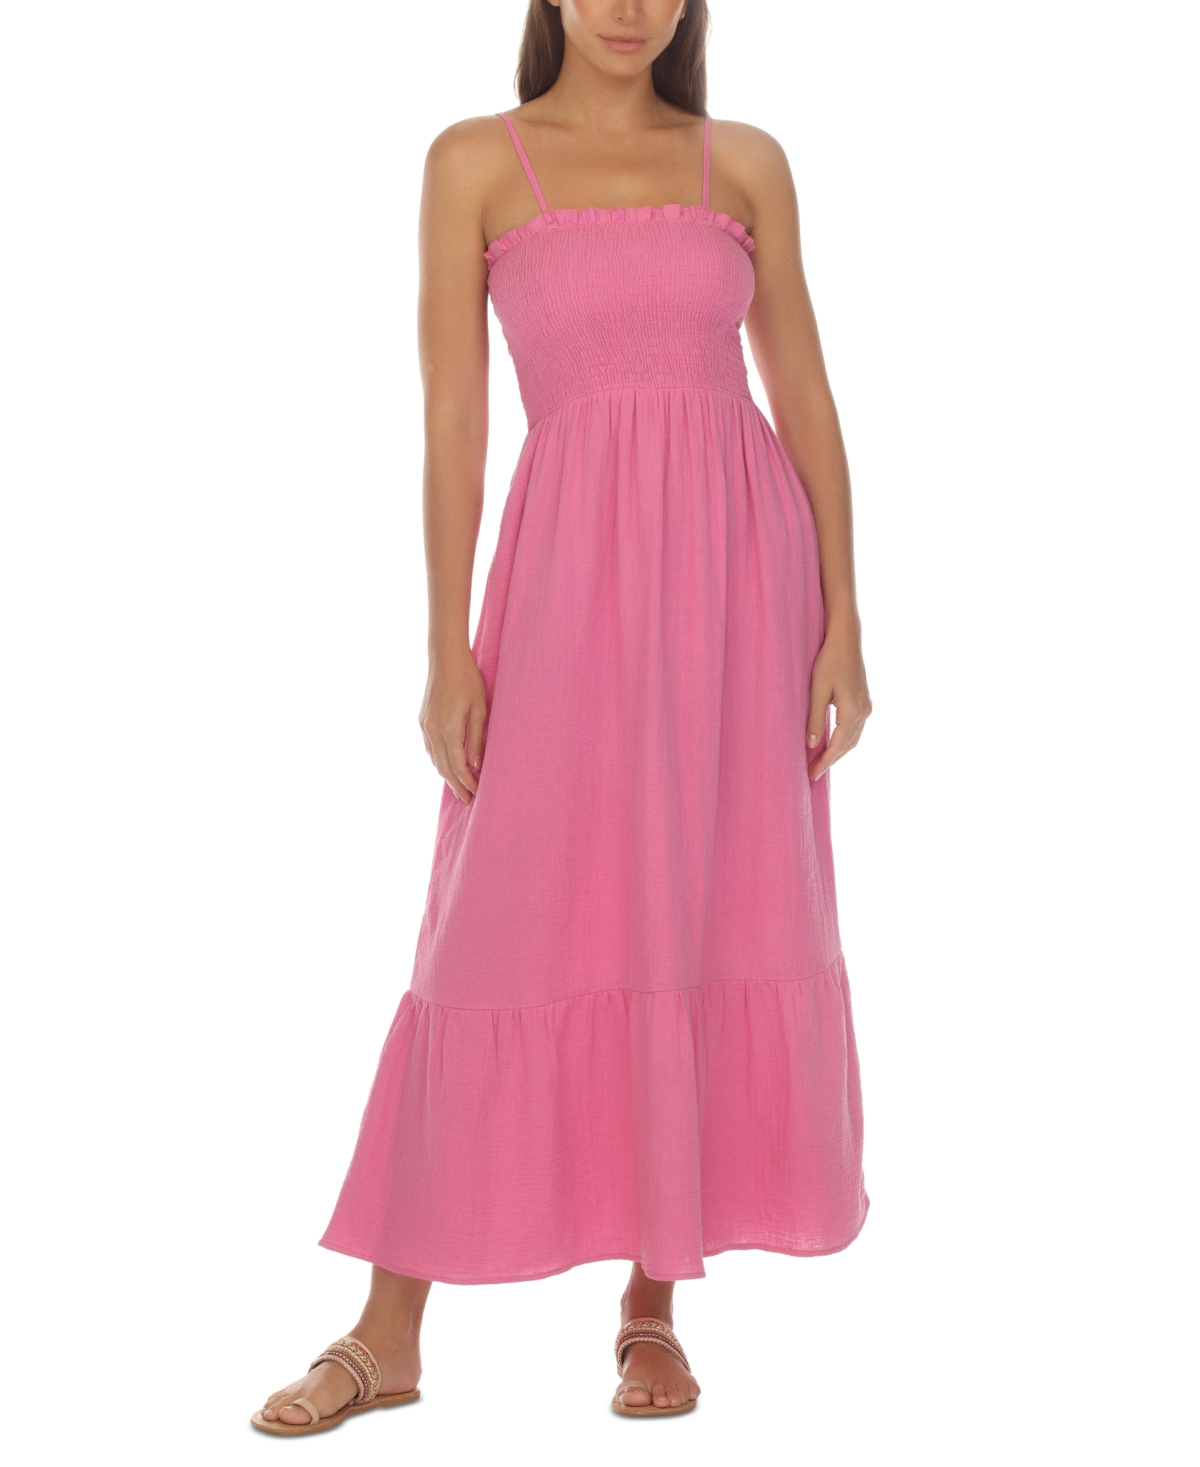 Women's Cotton Maxi Dress Cover-Up - Pink